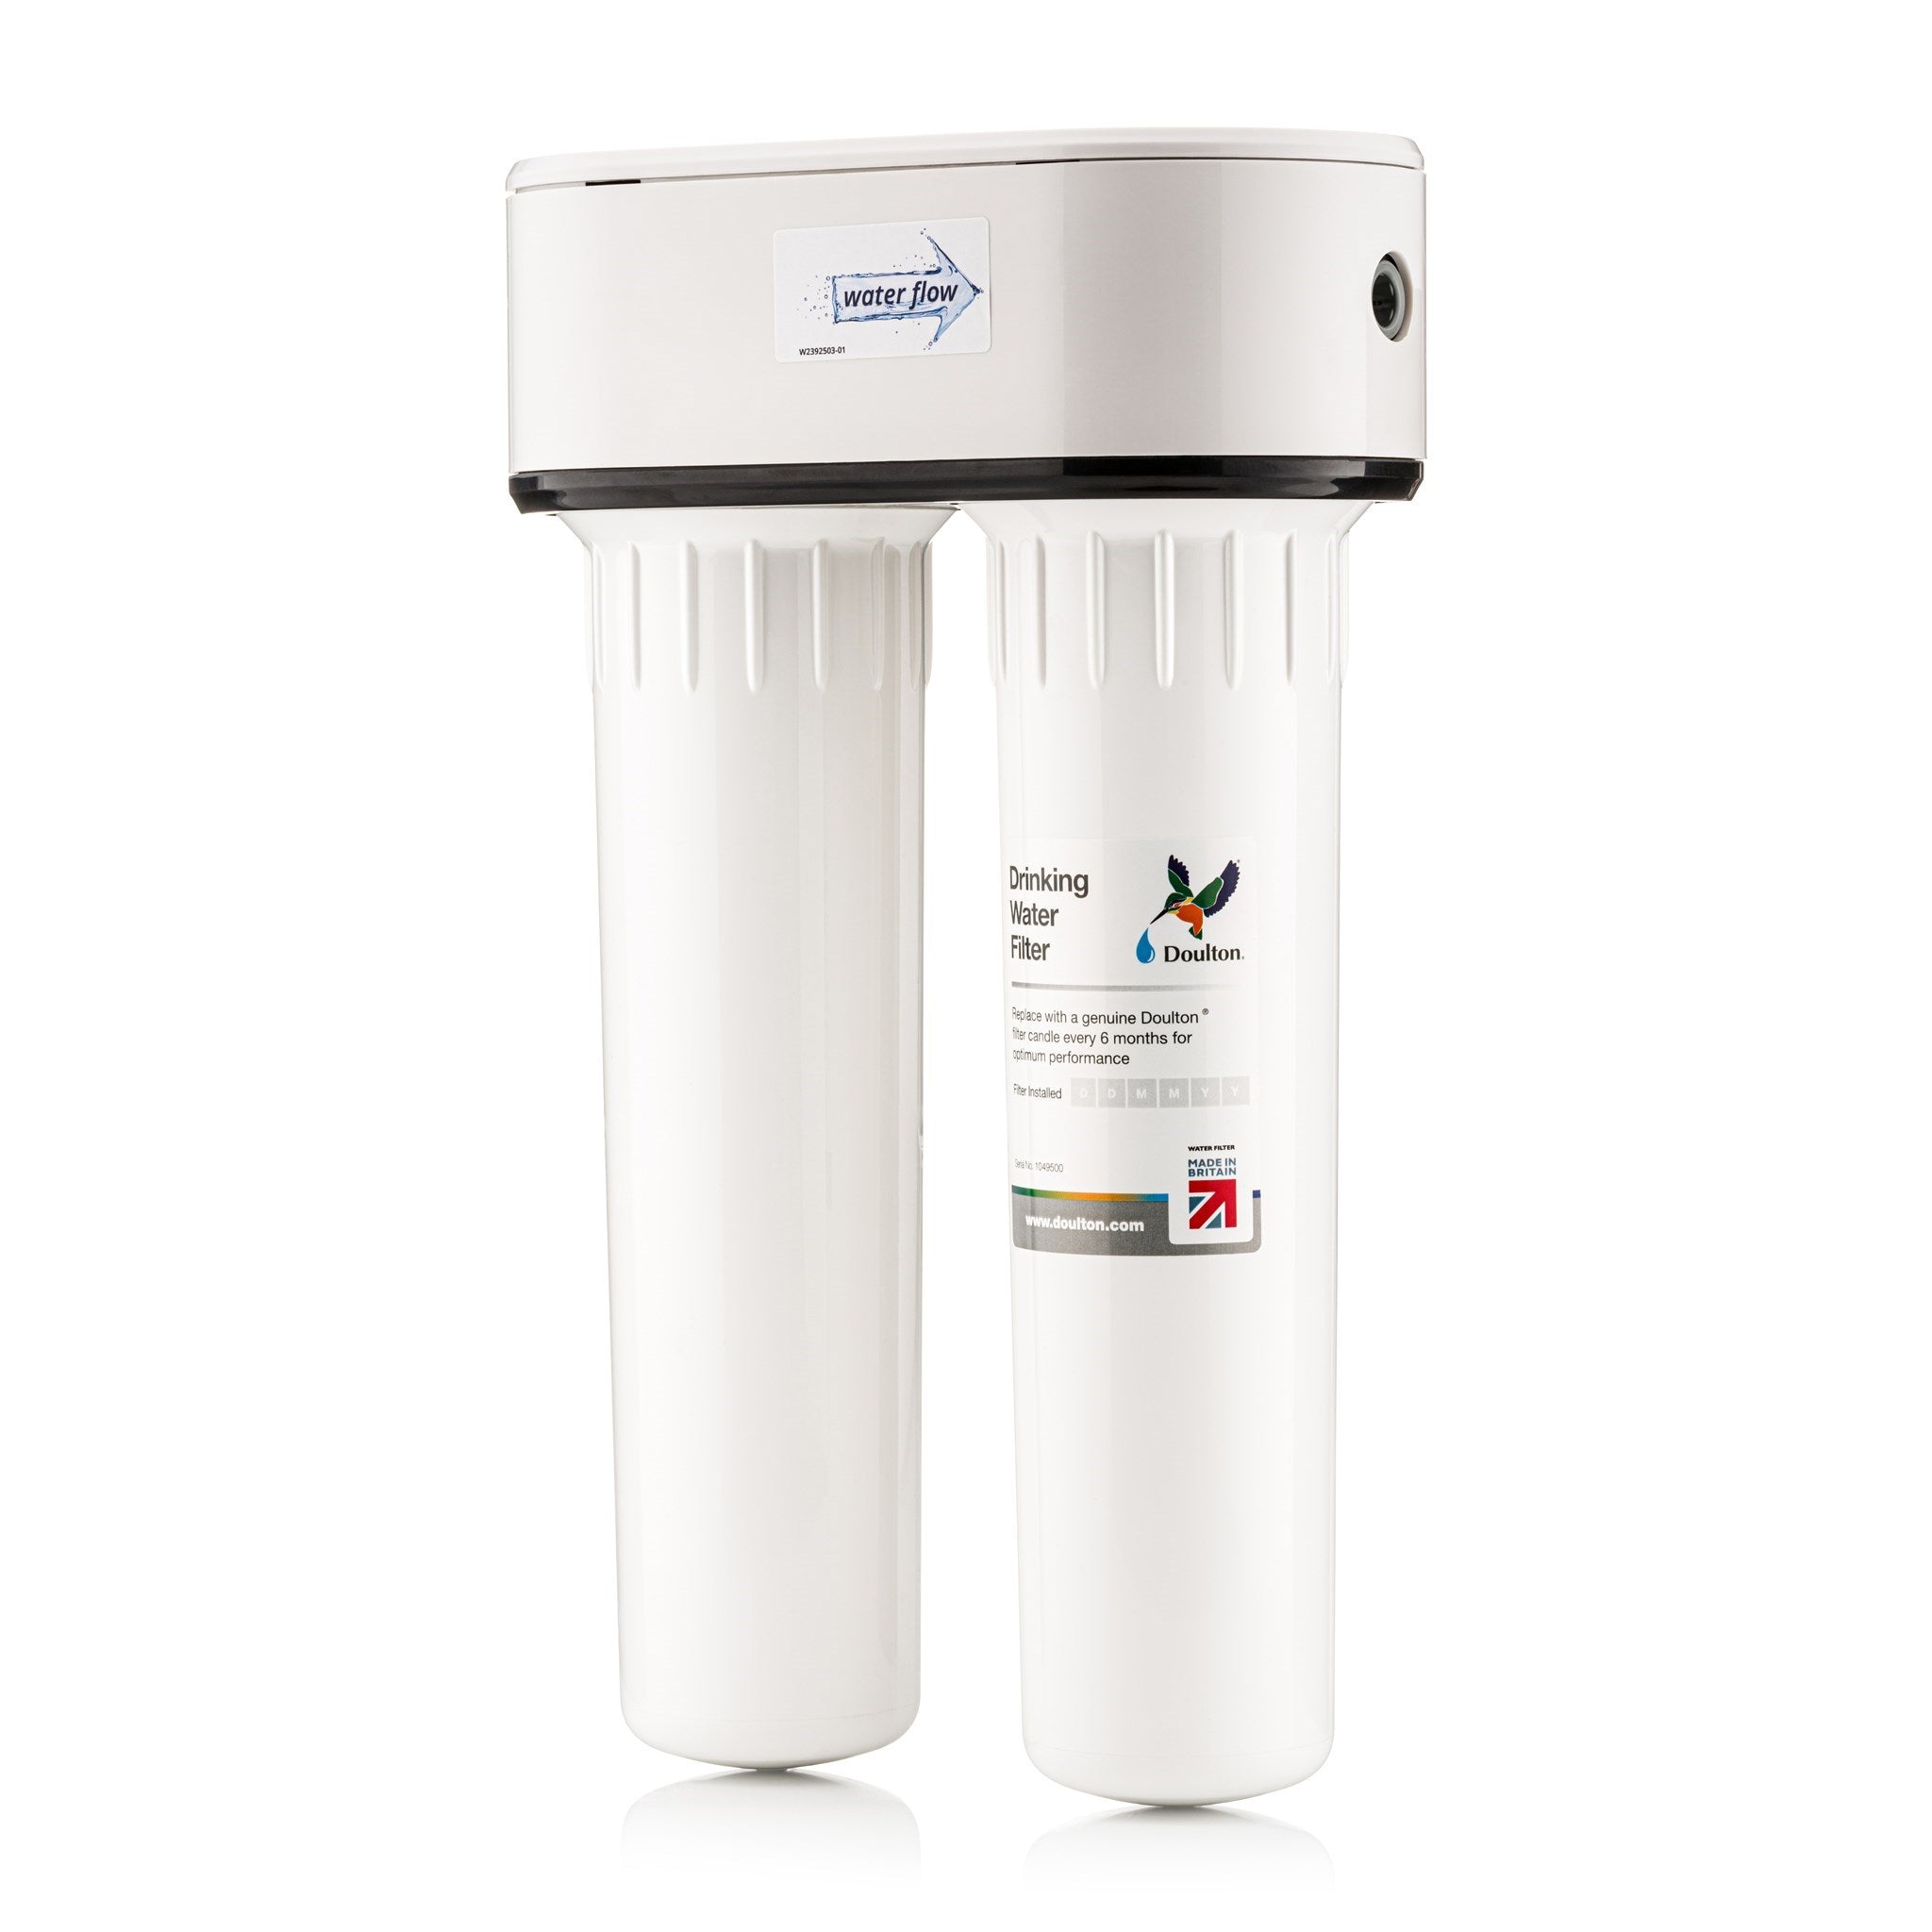 How To Install A Doulton® DUO Water Filter